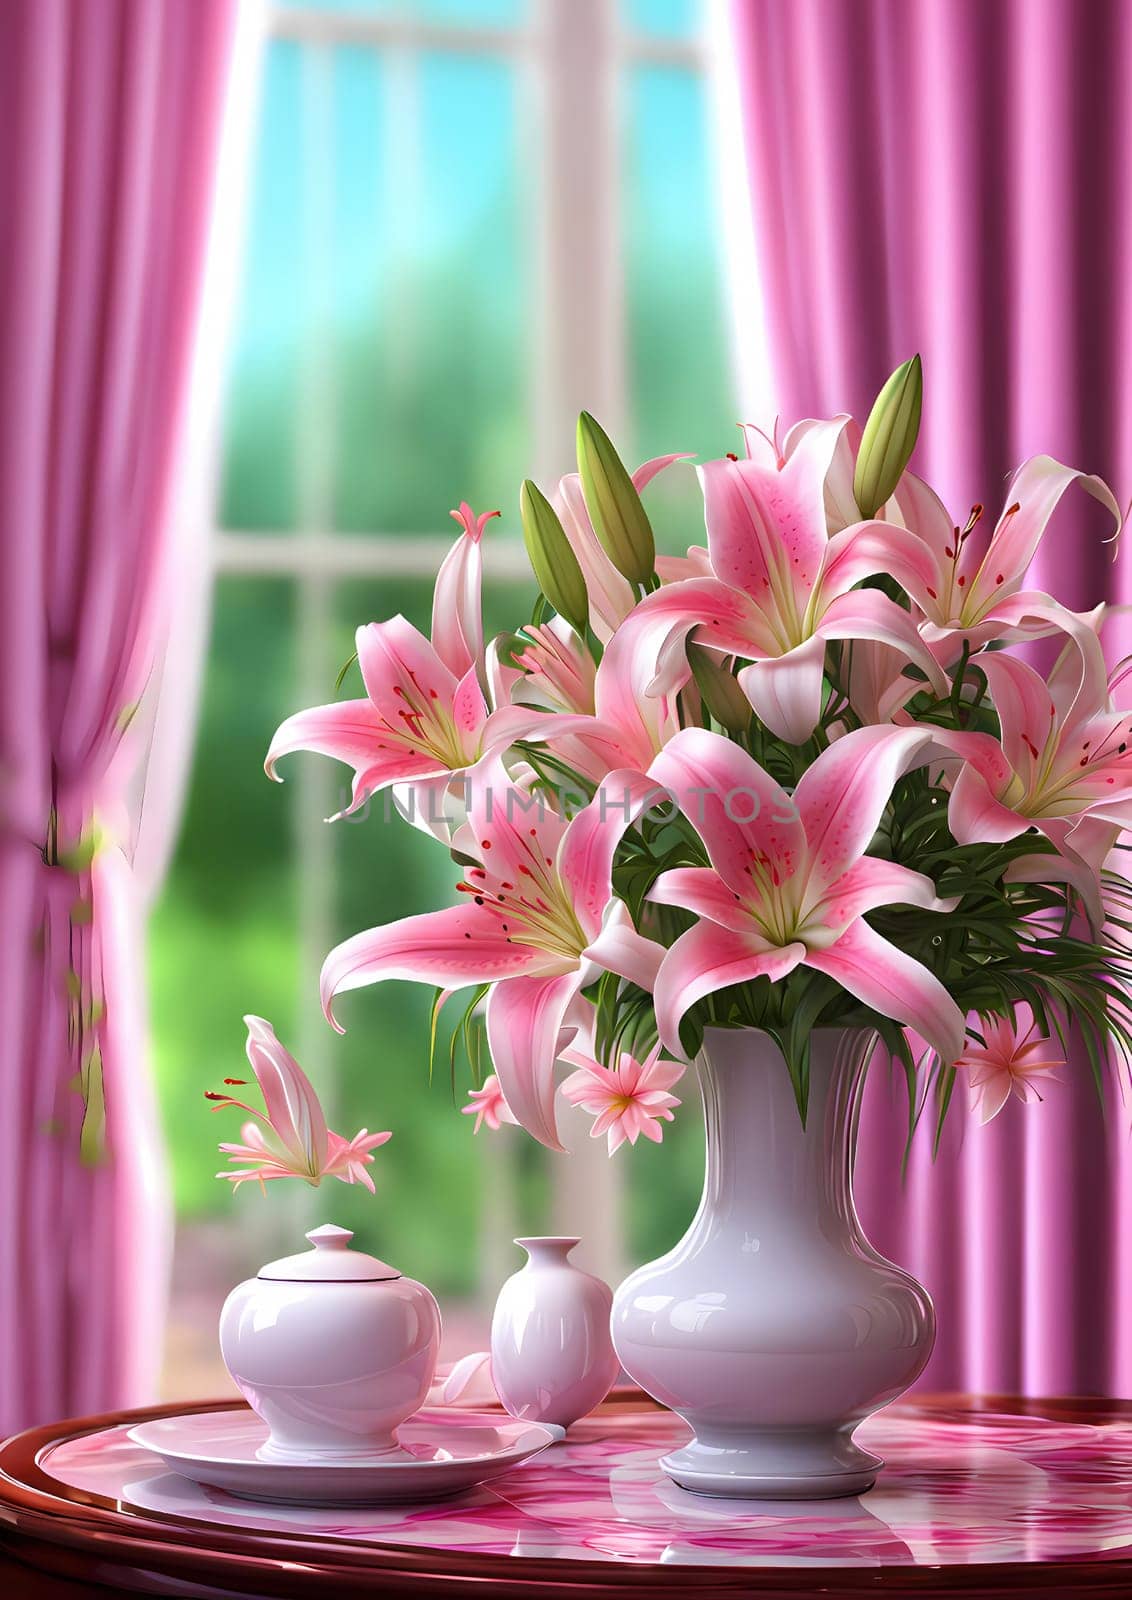 on the table is a vase with pink flowers, beautiful beautiful digital art, lilies, very extremely beautiful, beautiful curtains, soothing, Generate AI